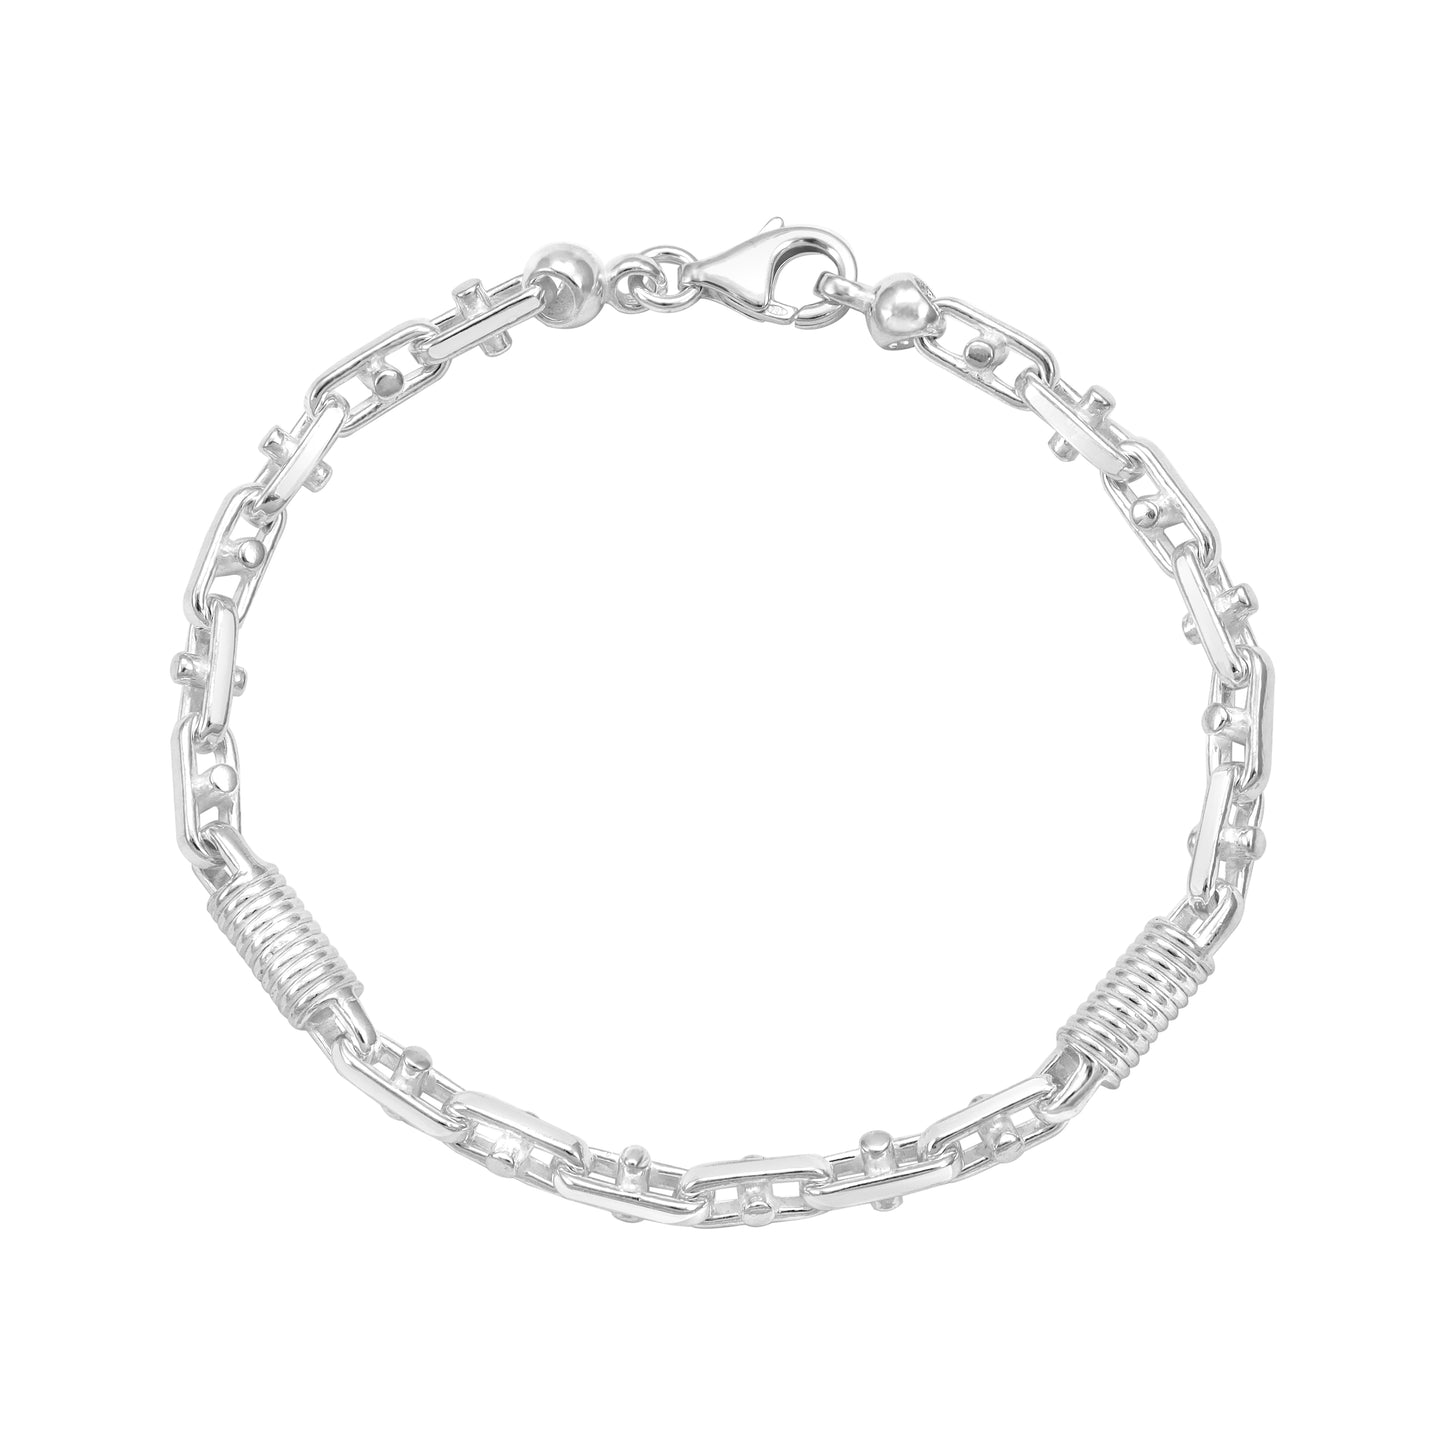 5mm Monte Carlo kette Armband - 925 Silber ver.2